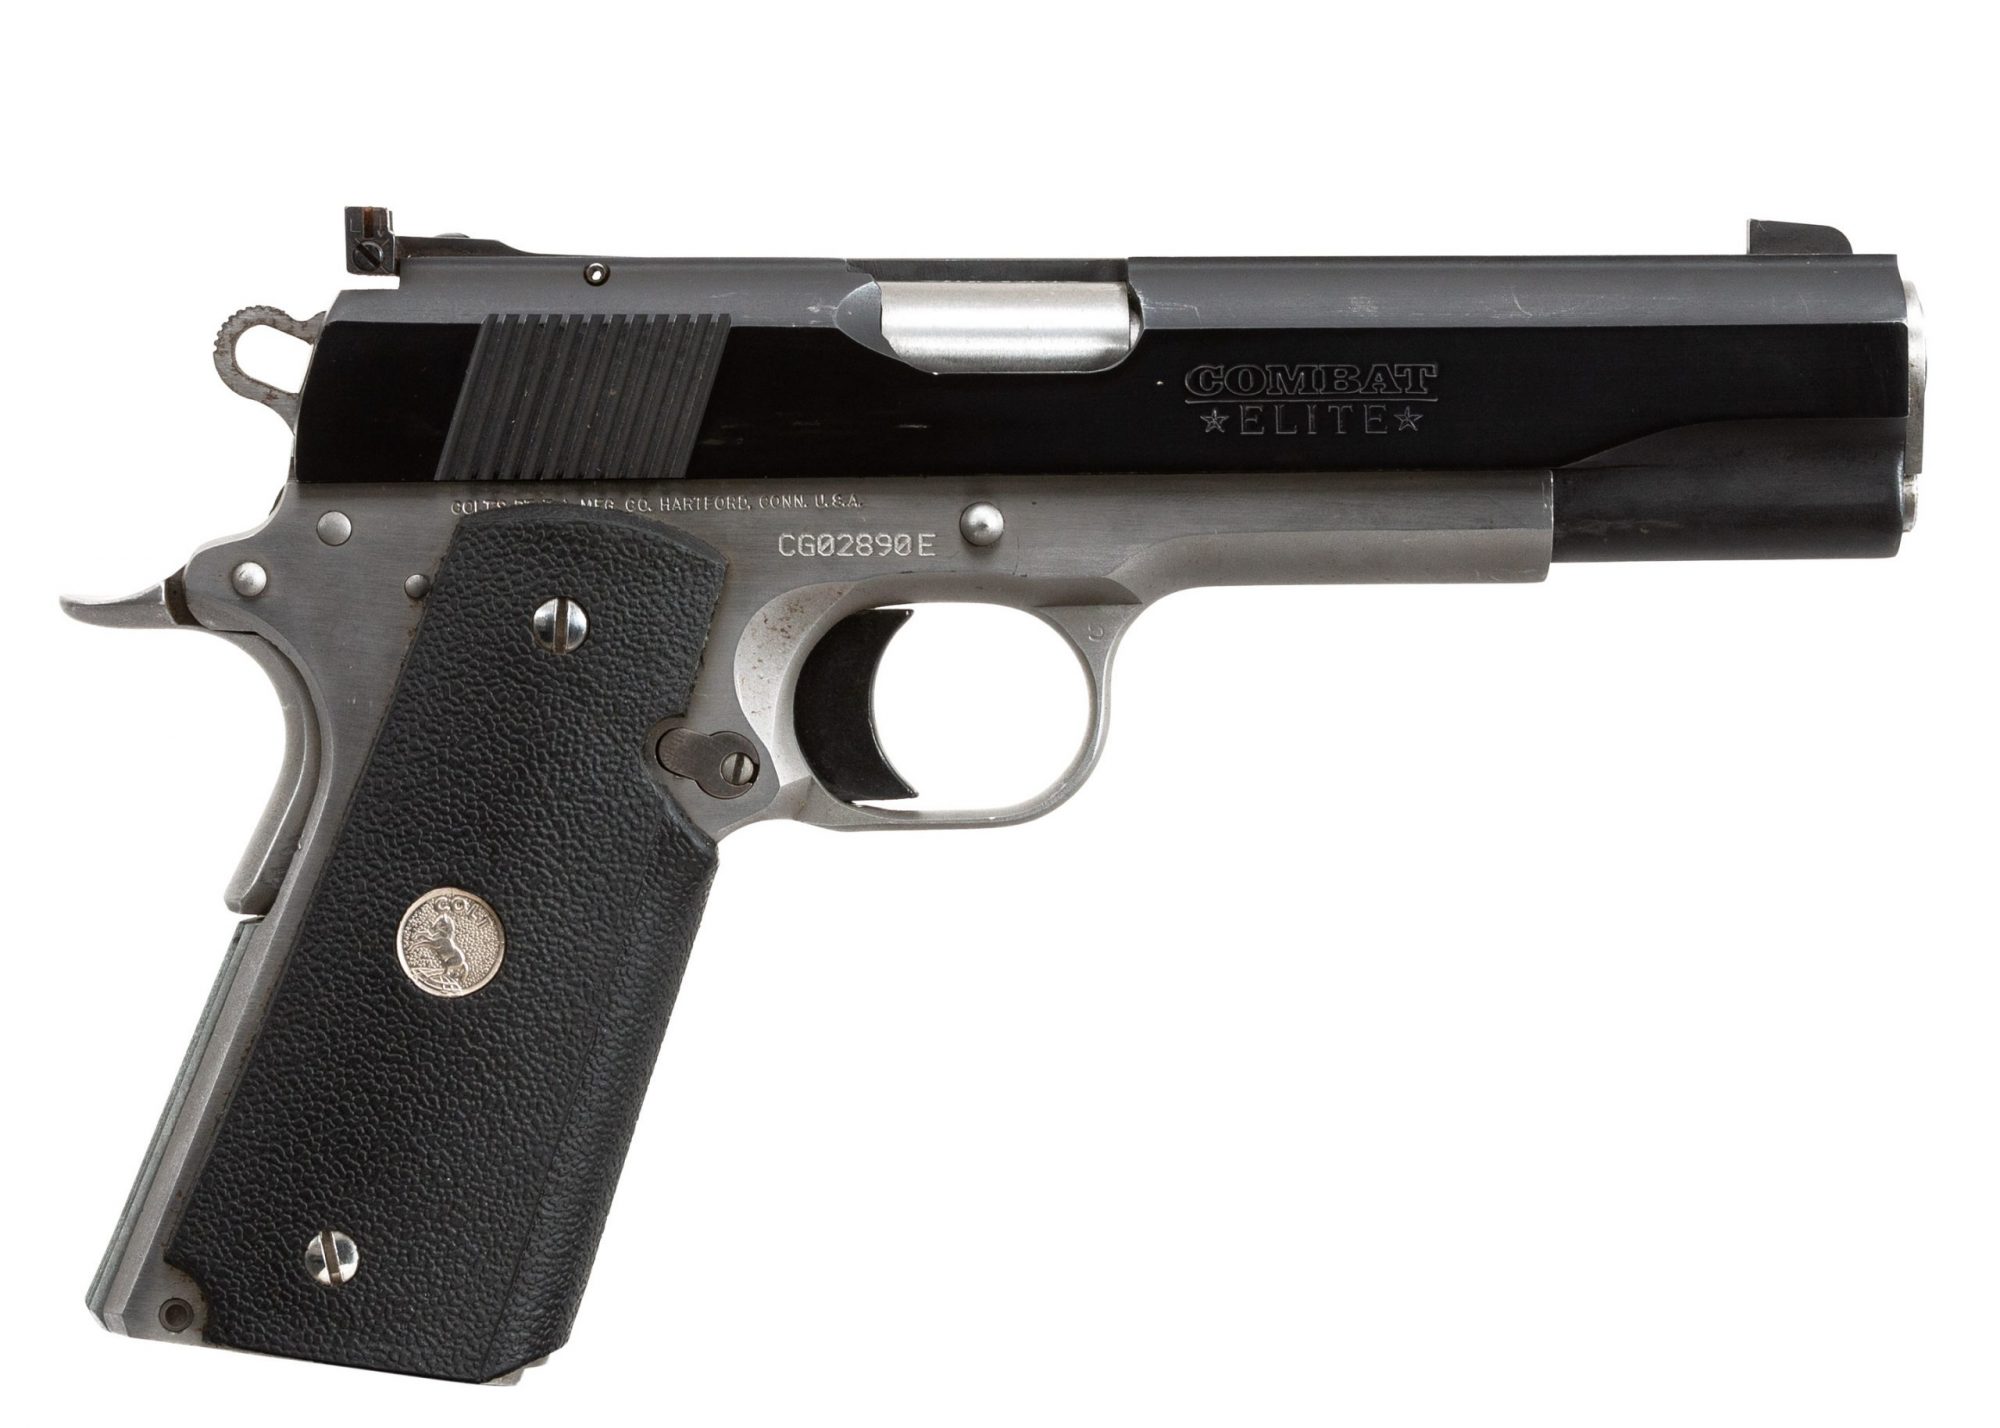 Photo of a pre-owned Colt MK IV Combat Elite, for sale as-is by Turnbull Restoration of Bloomfield, NY